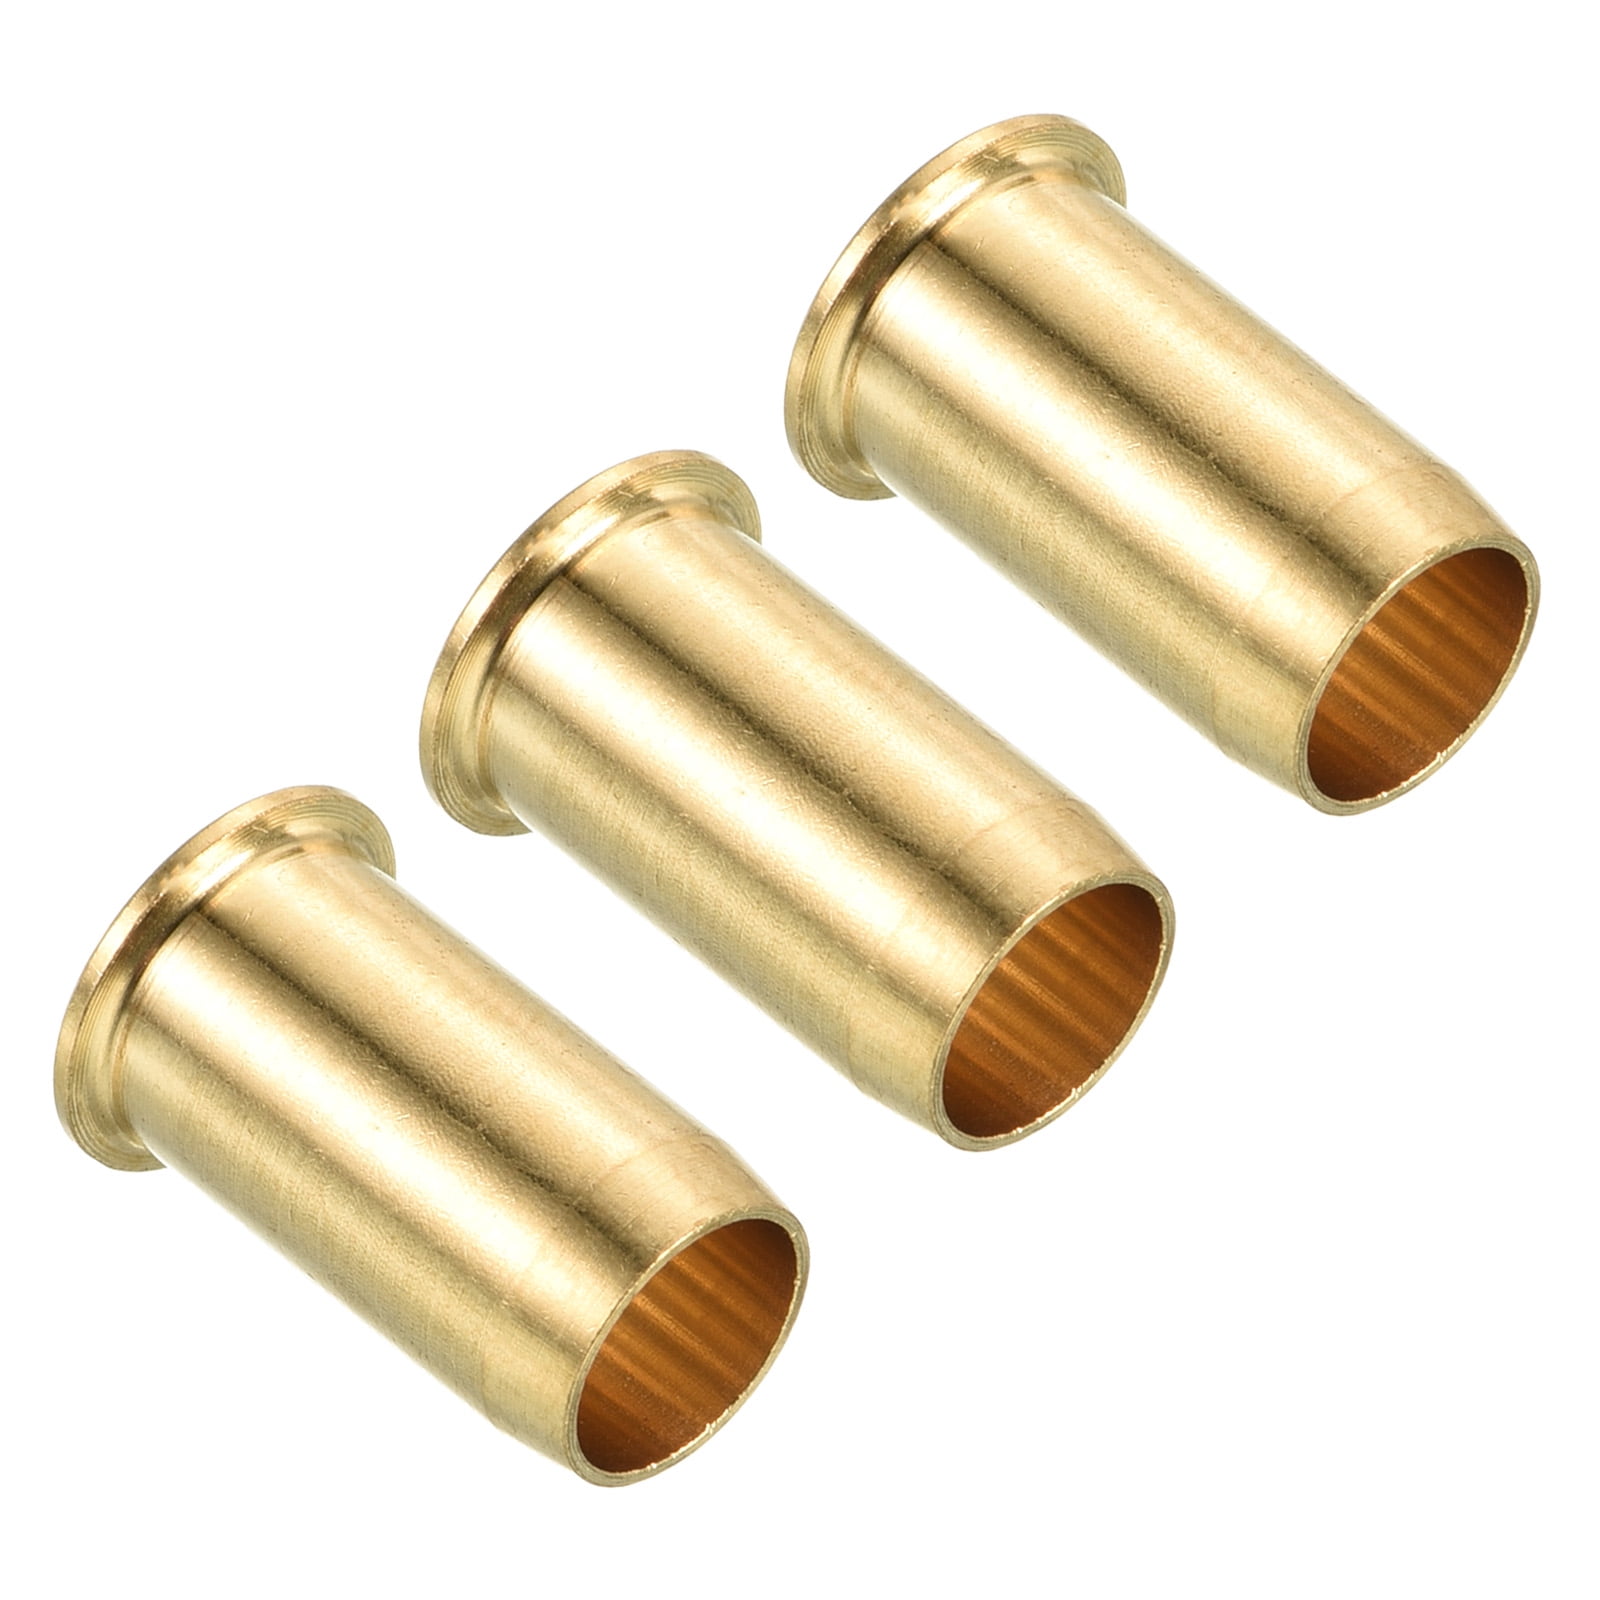 Uxcell 8mm Tube Brass Compression Fittings, 2 Pack Insert